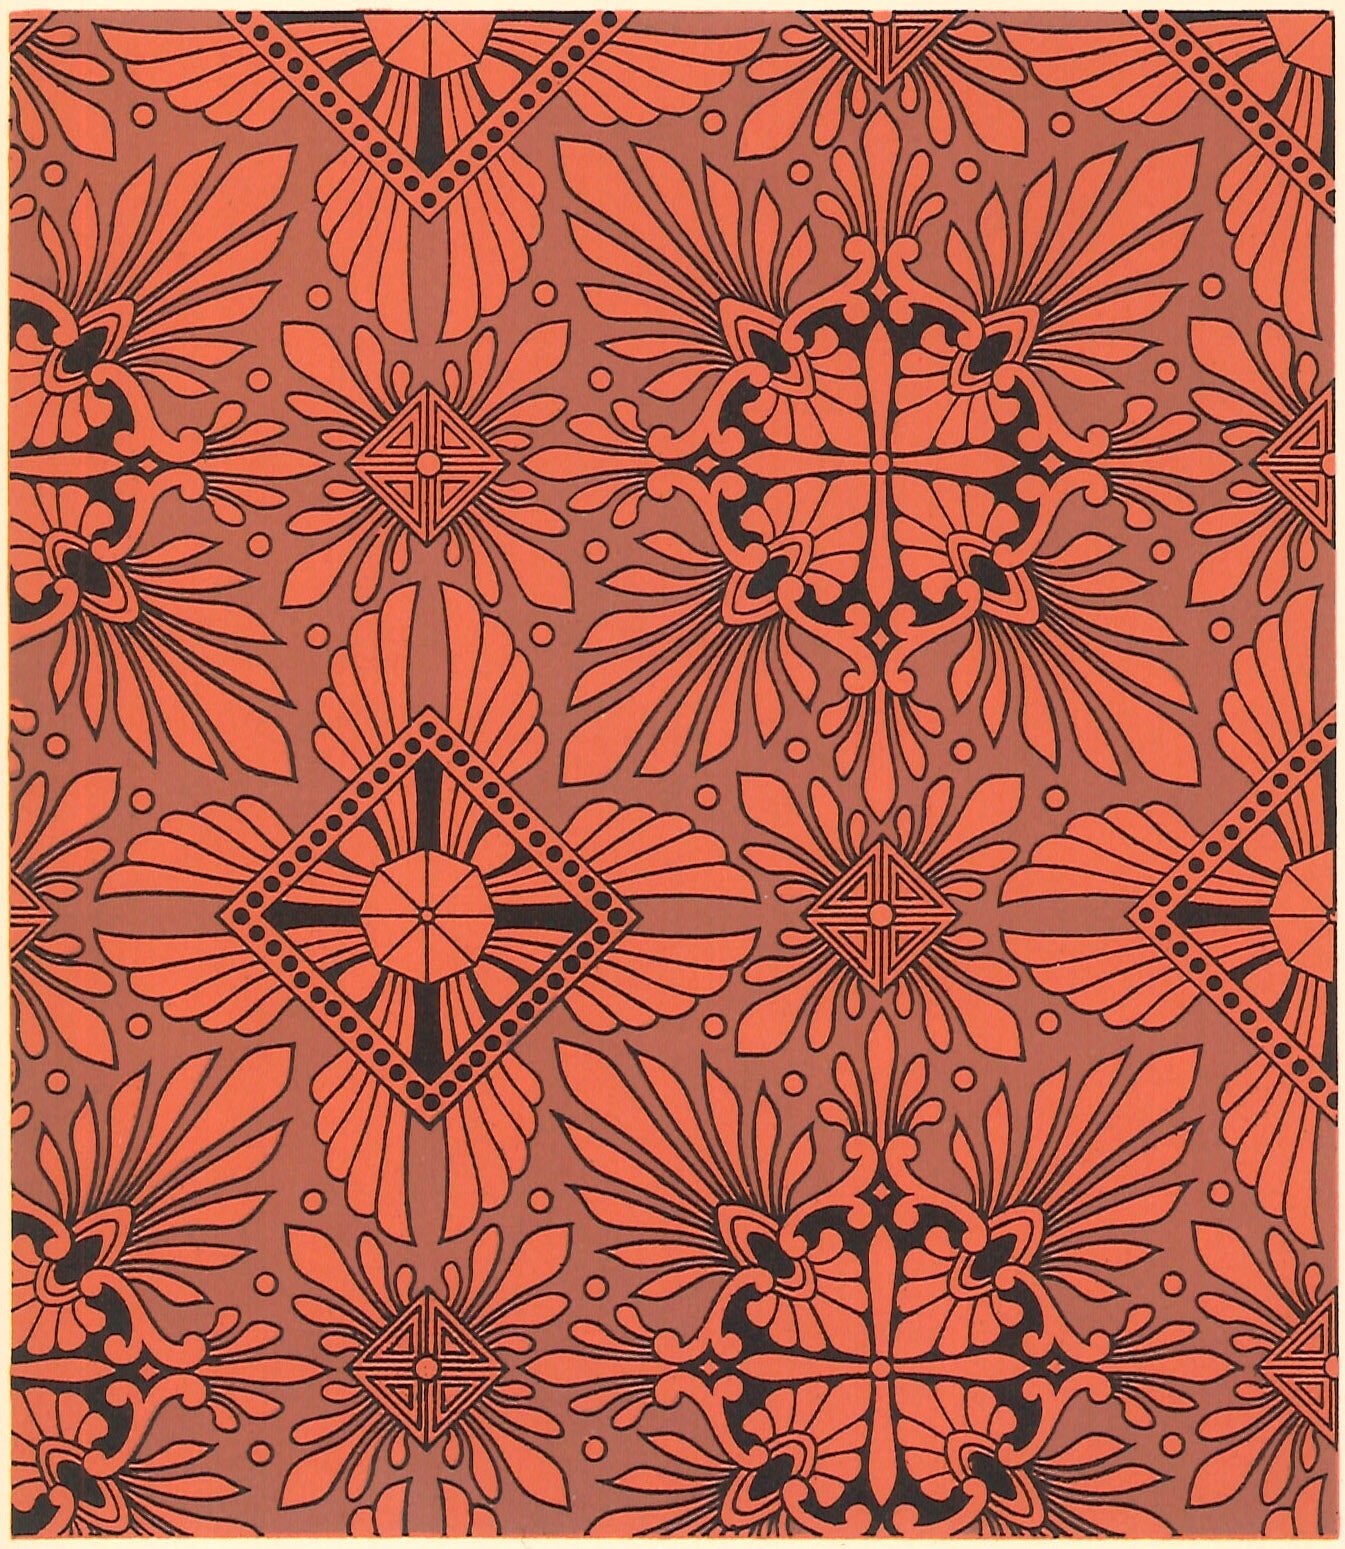 This is the illustration from Christopher Dresser's "Studies in Design", c. 1875, which is the source for this floorcloth's pattern.